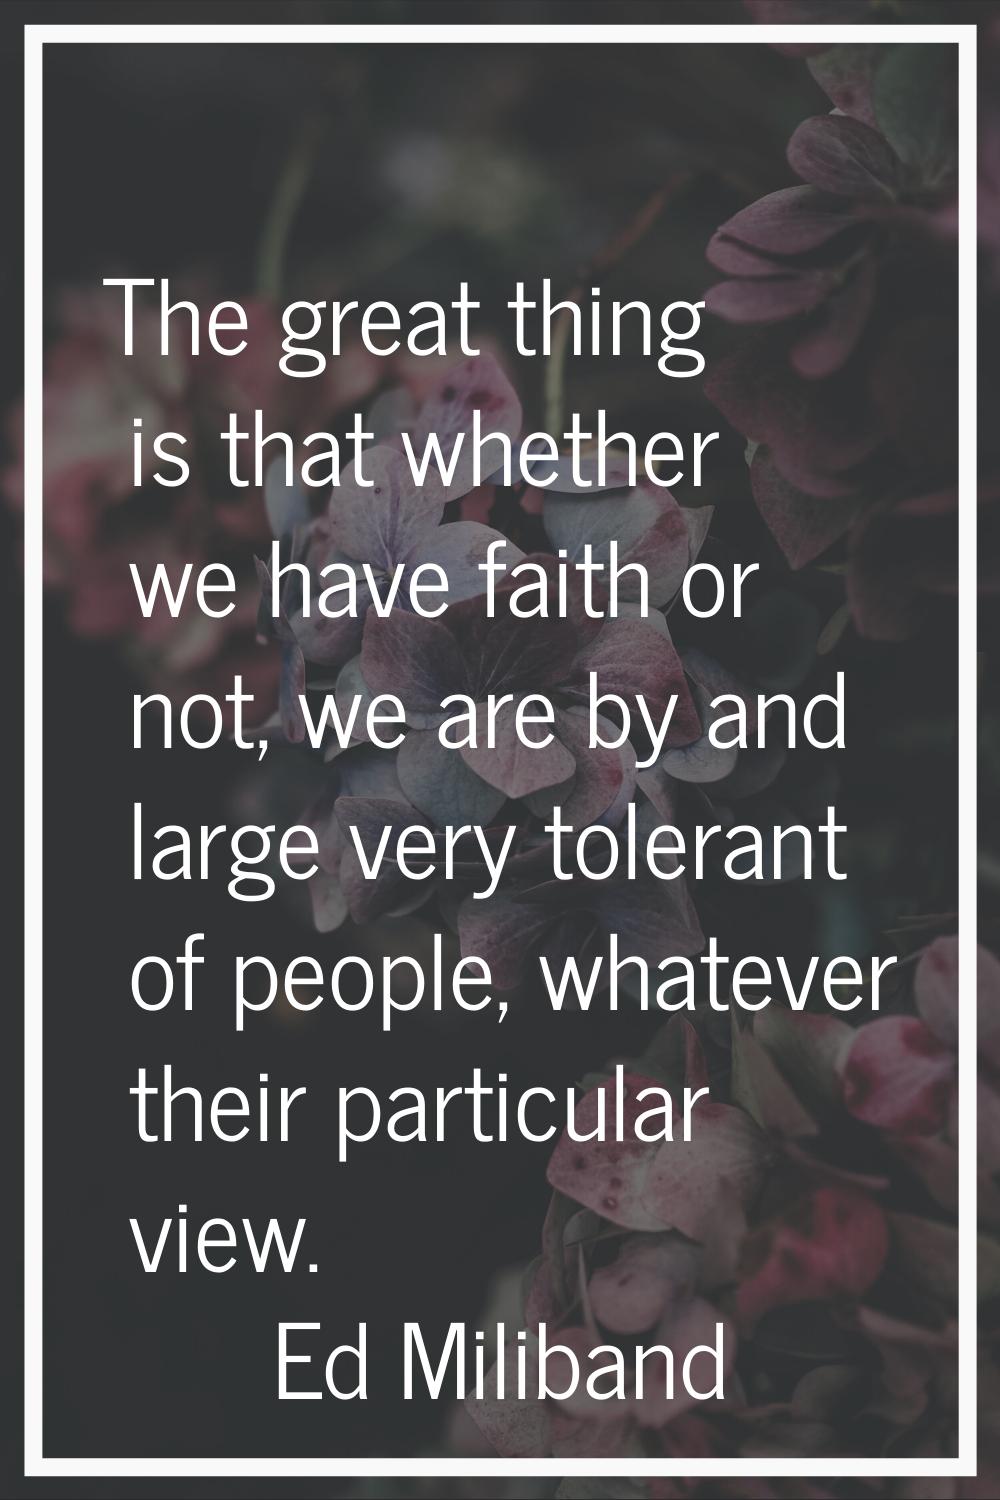 The great thing is that whether we have faith or not, we are by and large very tolerant of people, 